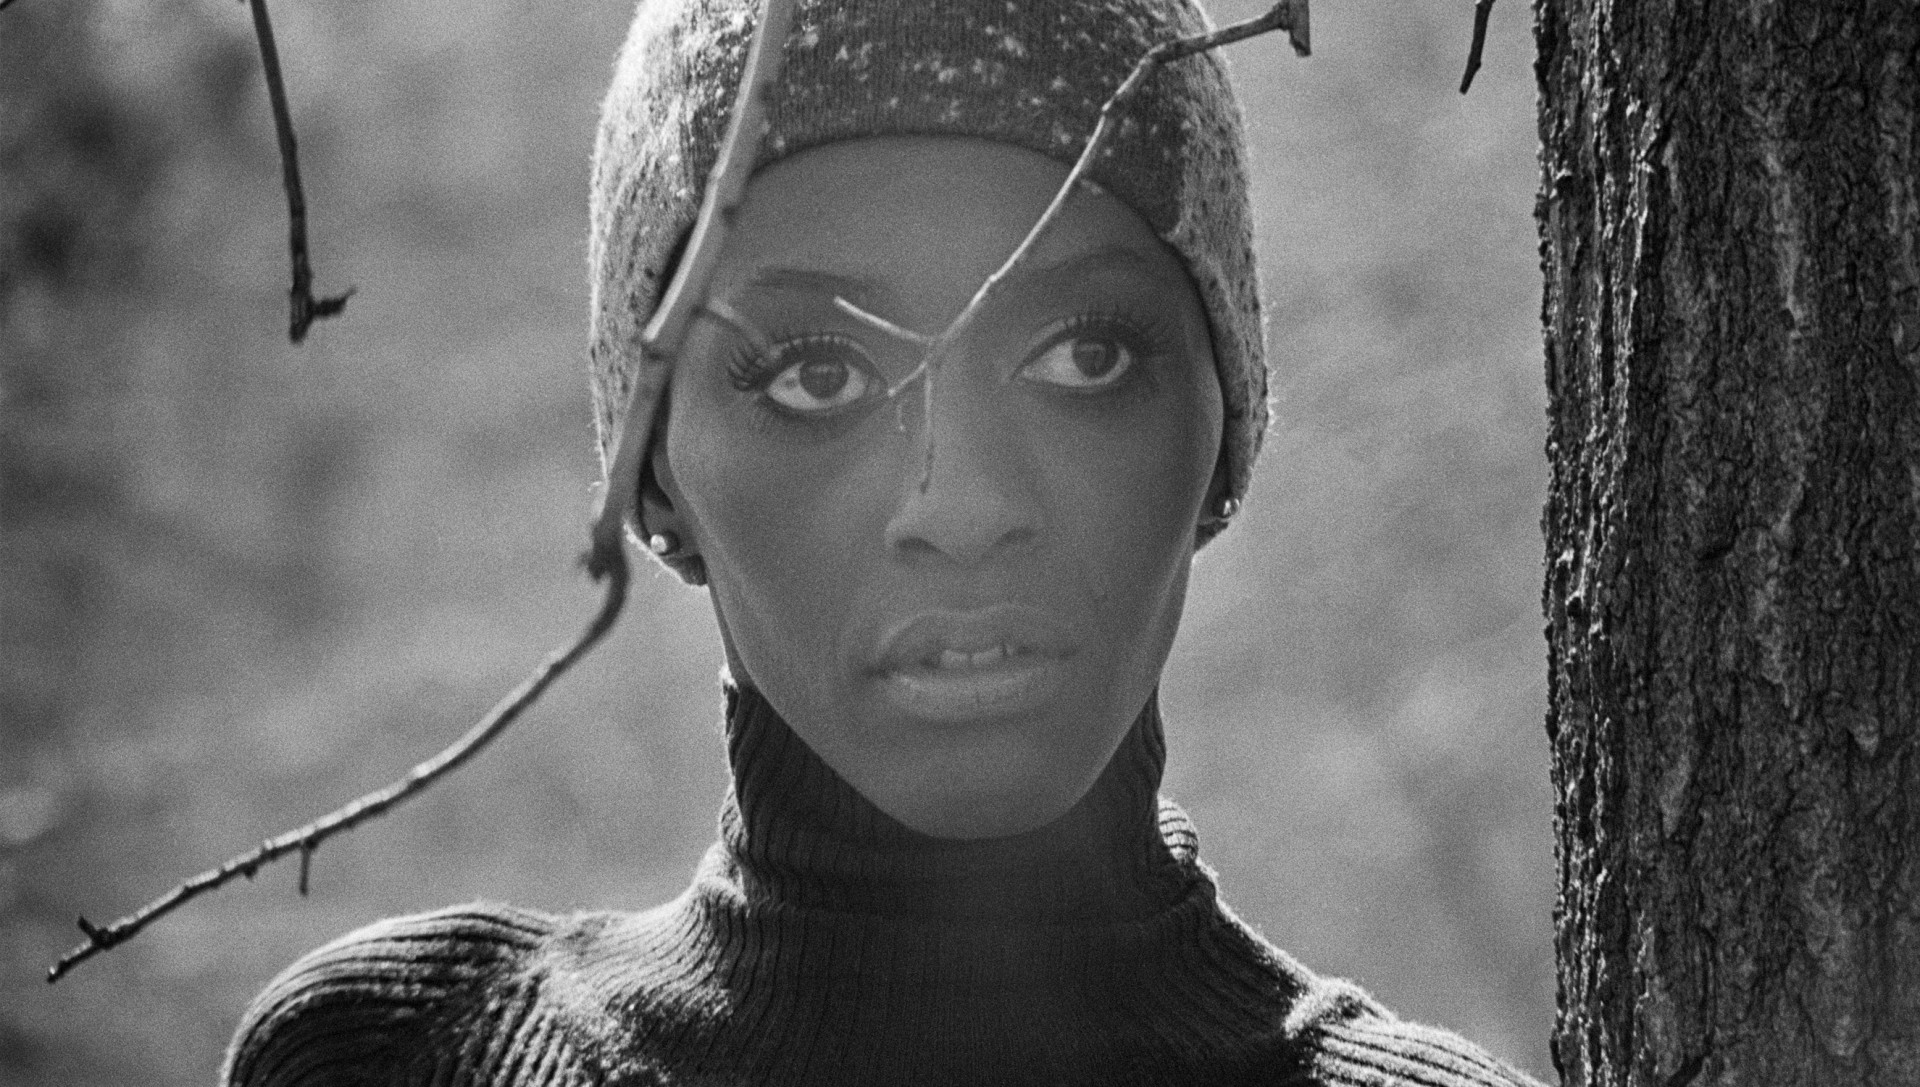 A still photo shows Bethann Hardison, a Black person, in close-up, looking longingly off to the right of the camera, standing behind a tree and wearing a beanie hat.